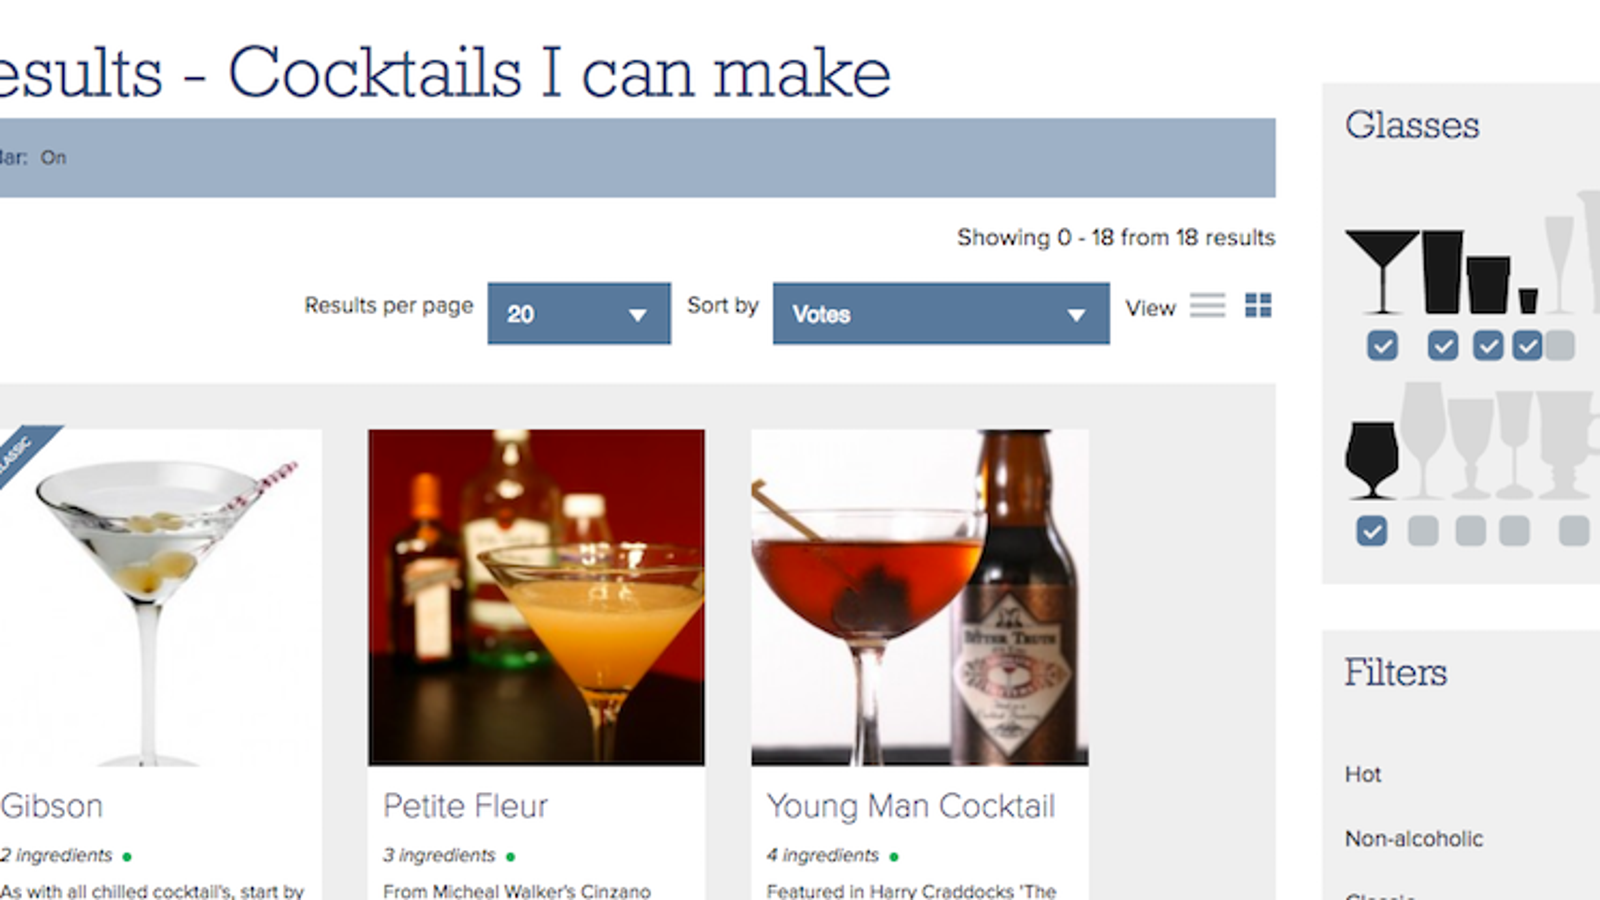 Make Me a Cocktail Suggests Drink Recipes Based on Ingredients You Have at Home